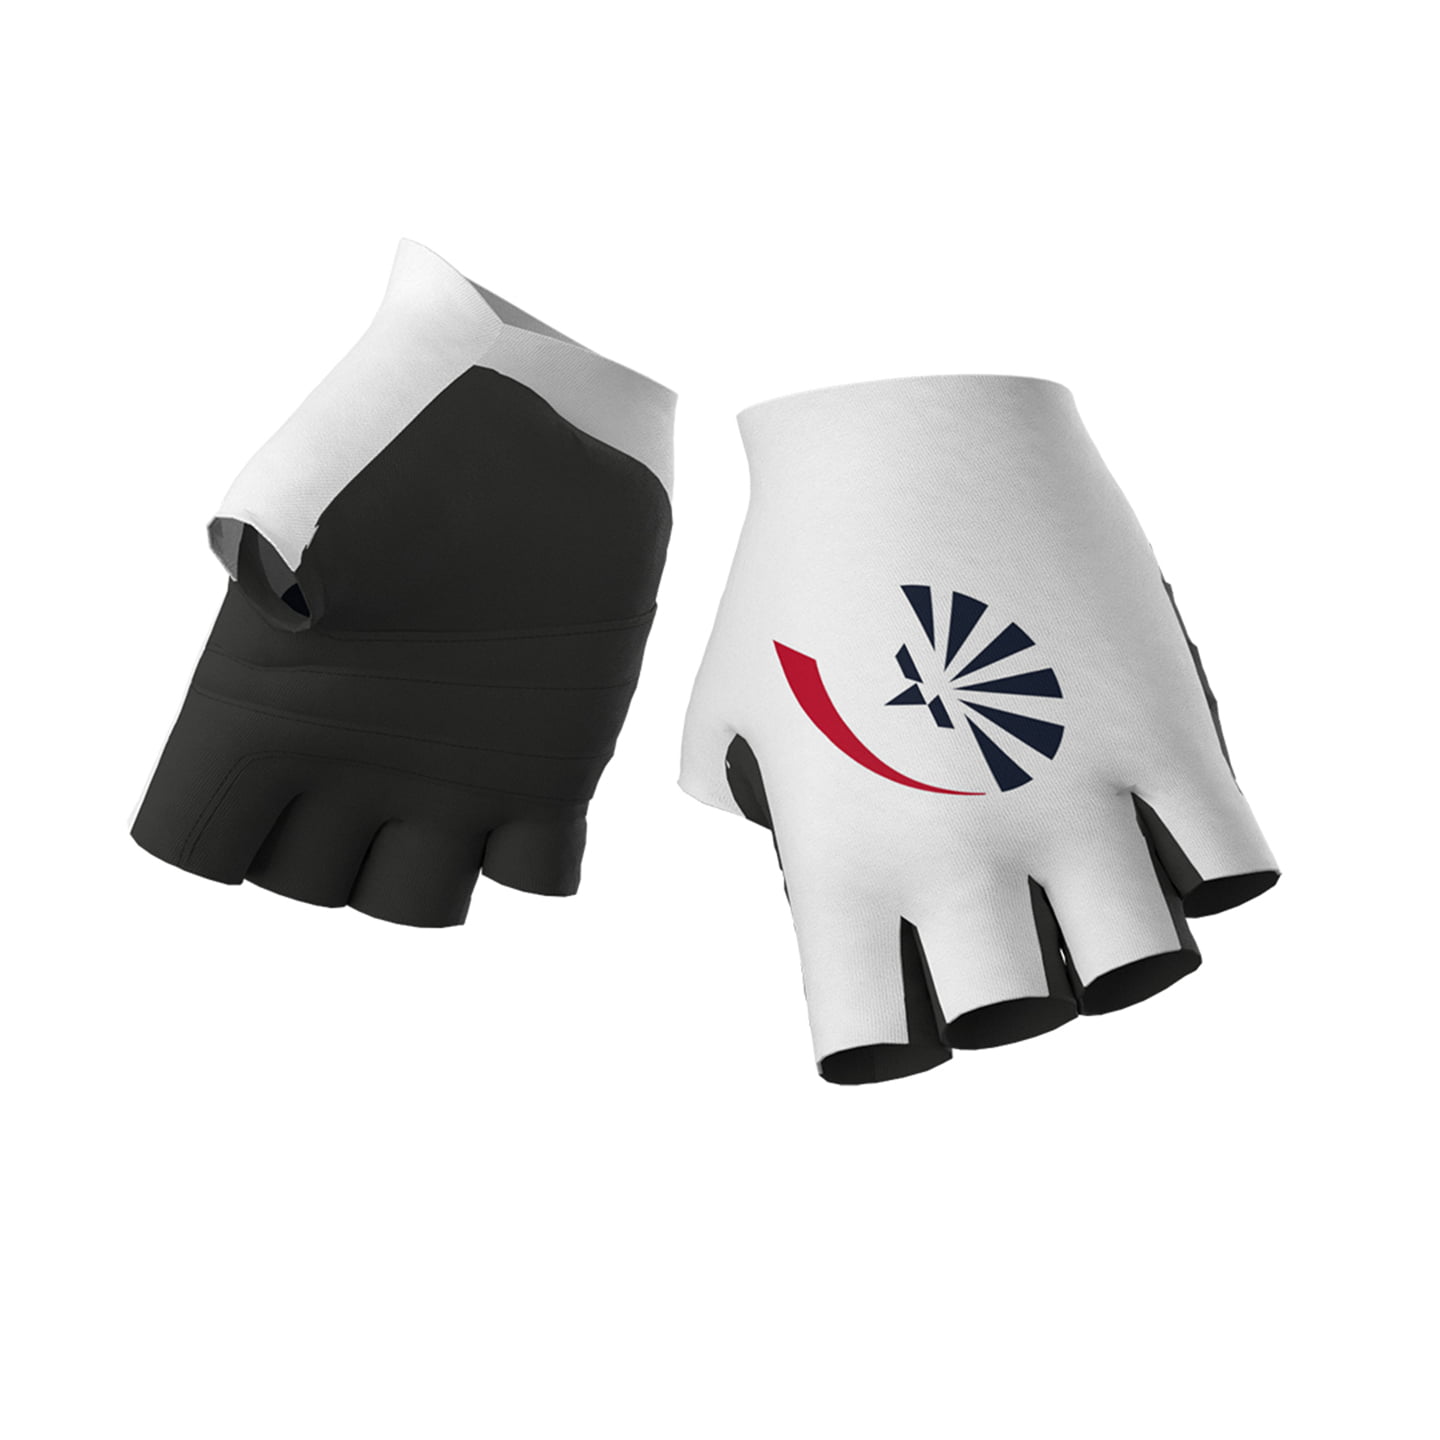 GROUPAMA - FDJ 2024 Cycling Gloves, for men, size XL, Cycling gloves, Cycle gear